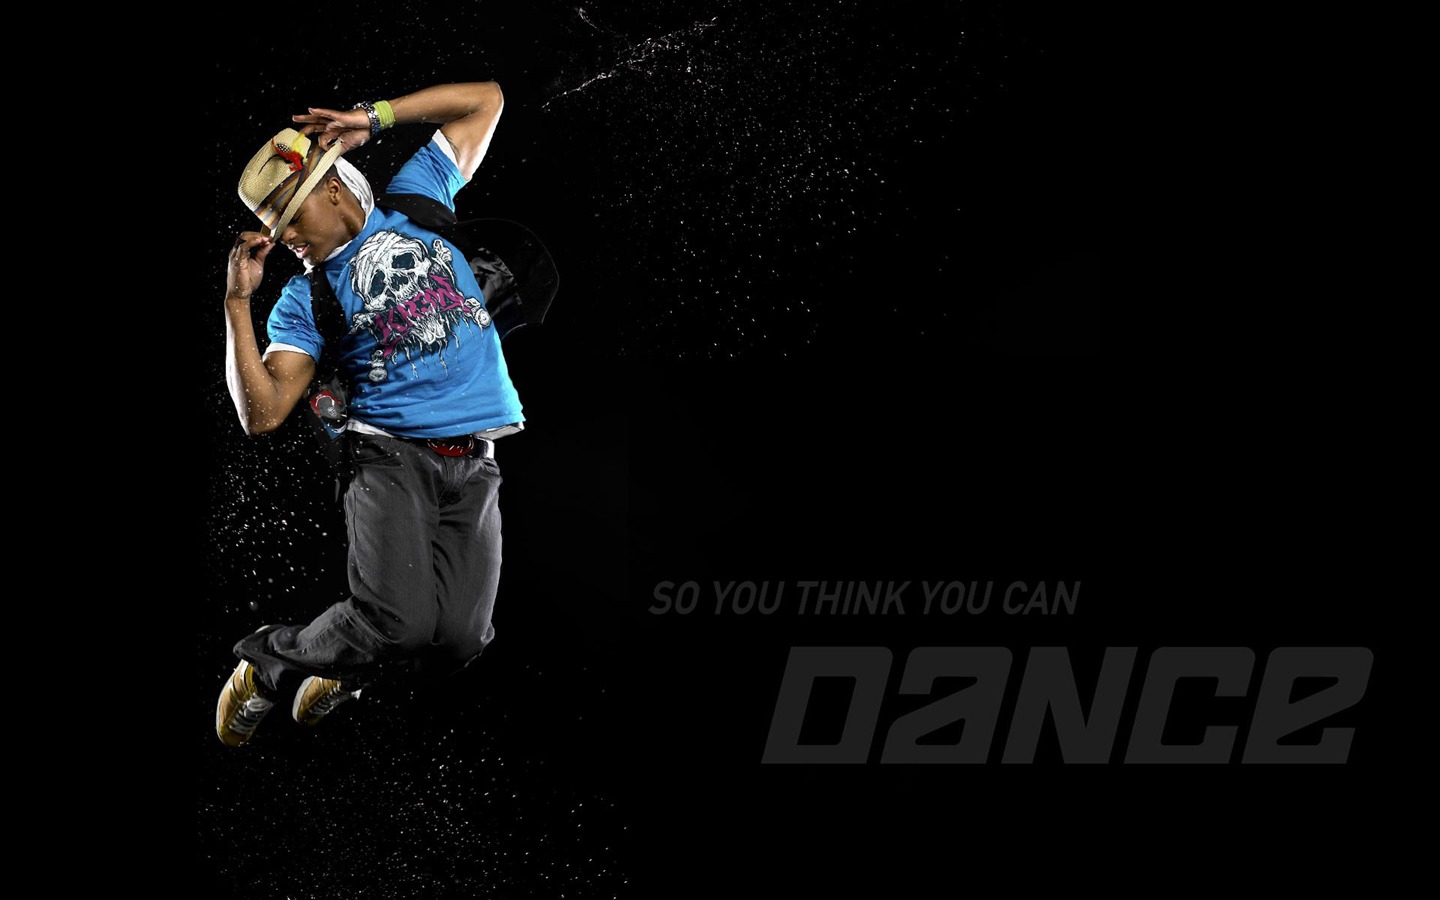 So You Think You Can Dance wallpaper (1) #20 - 1440x900